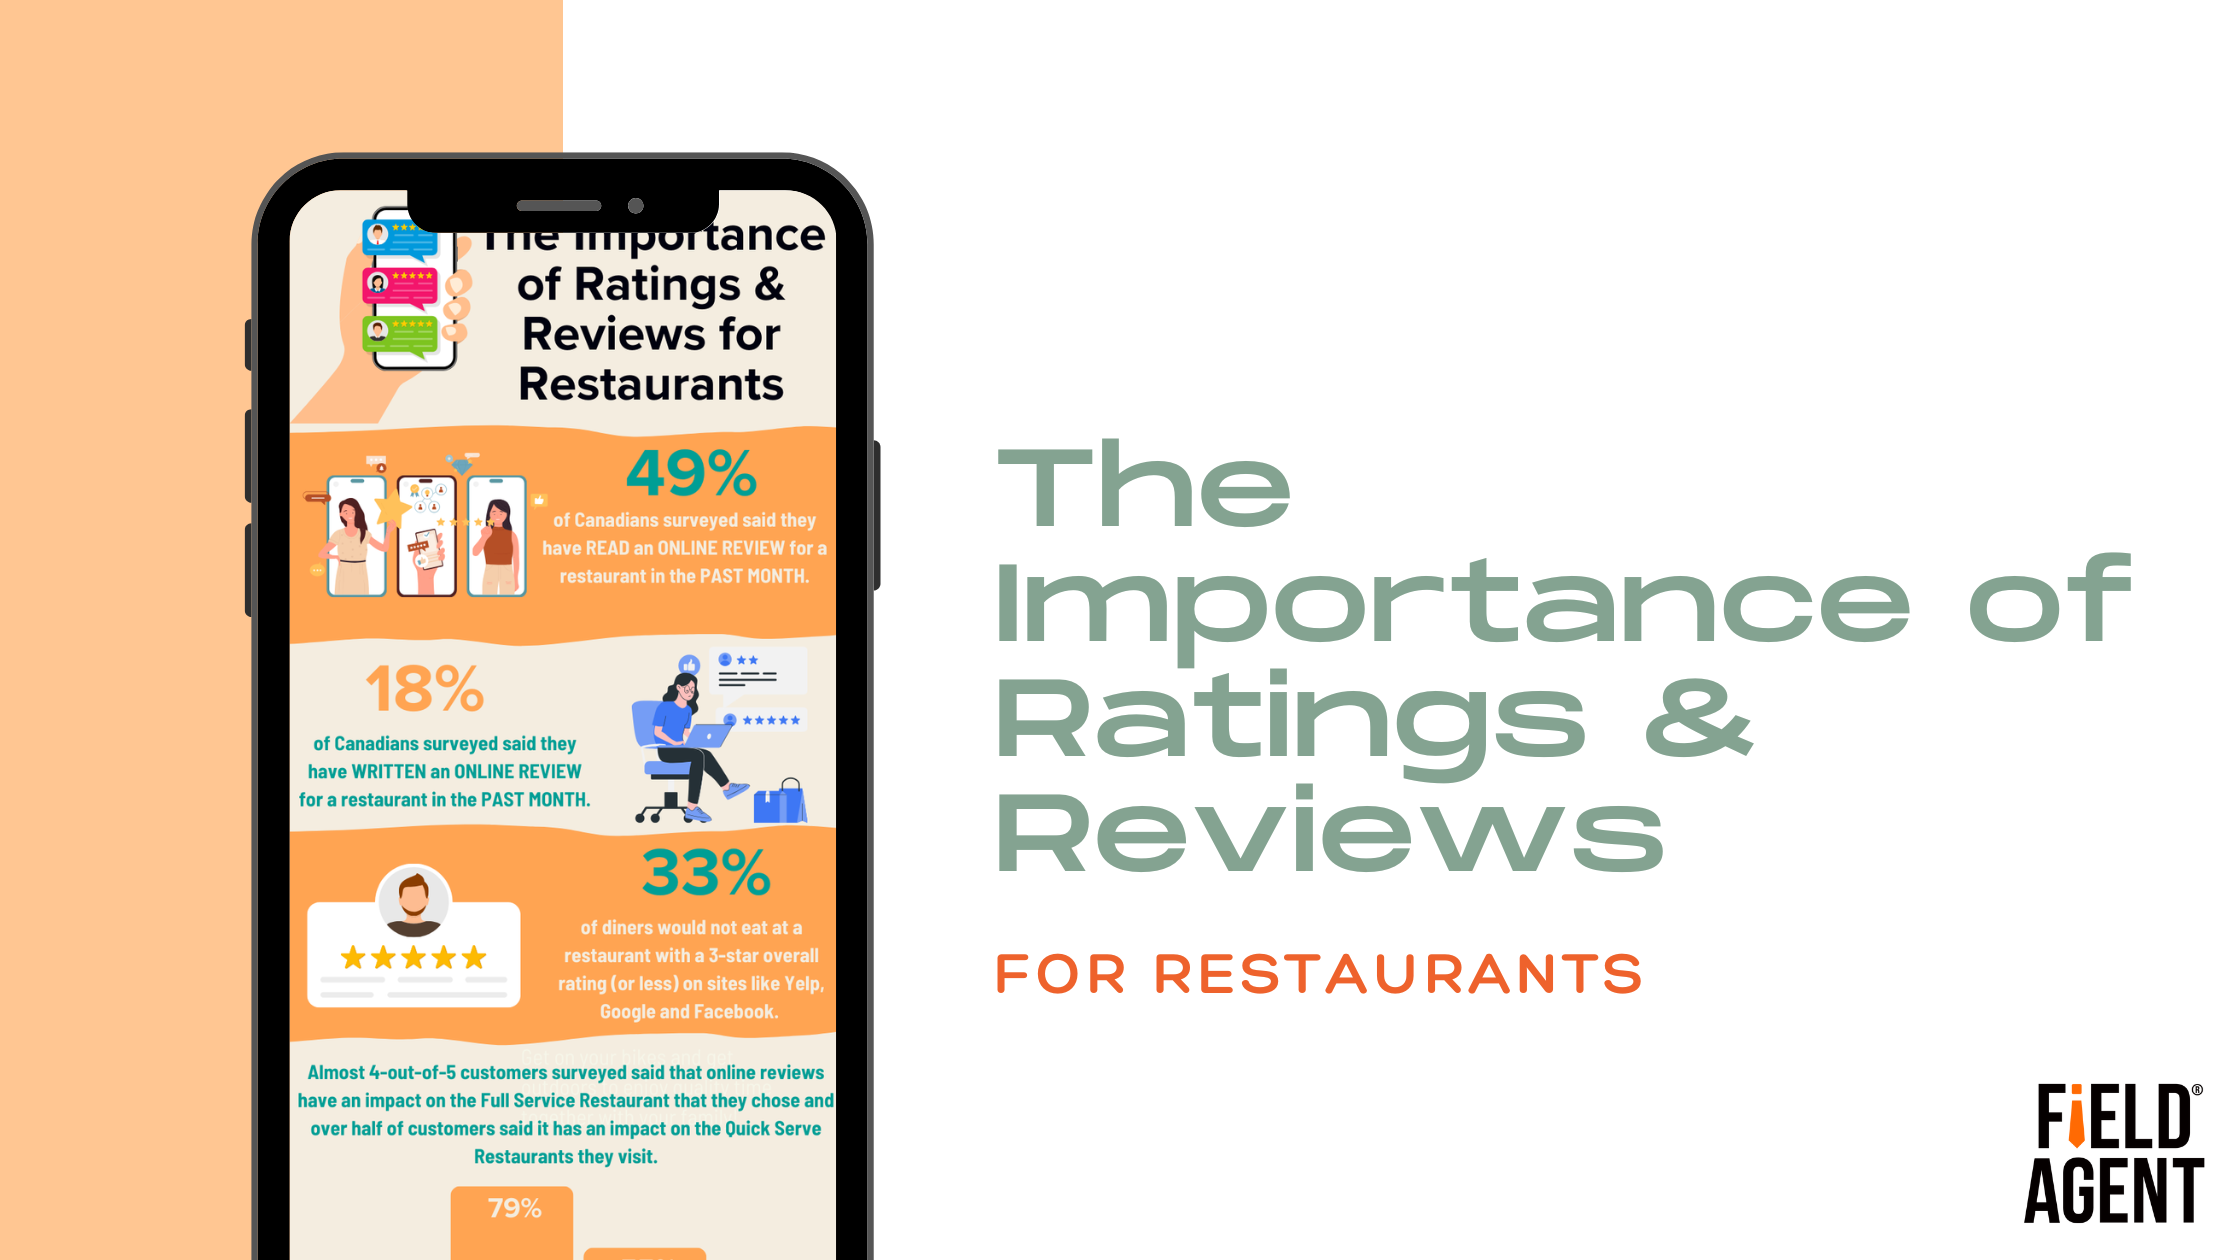 The importance of ratings & reviews for restaurants